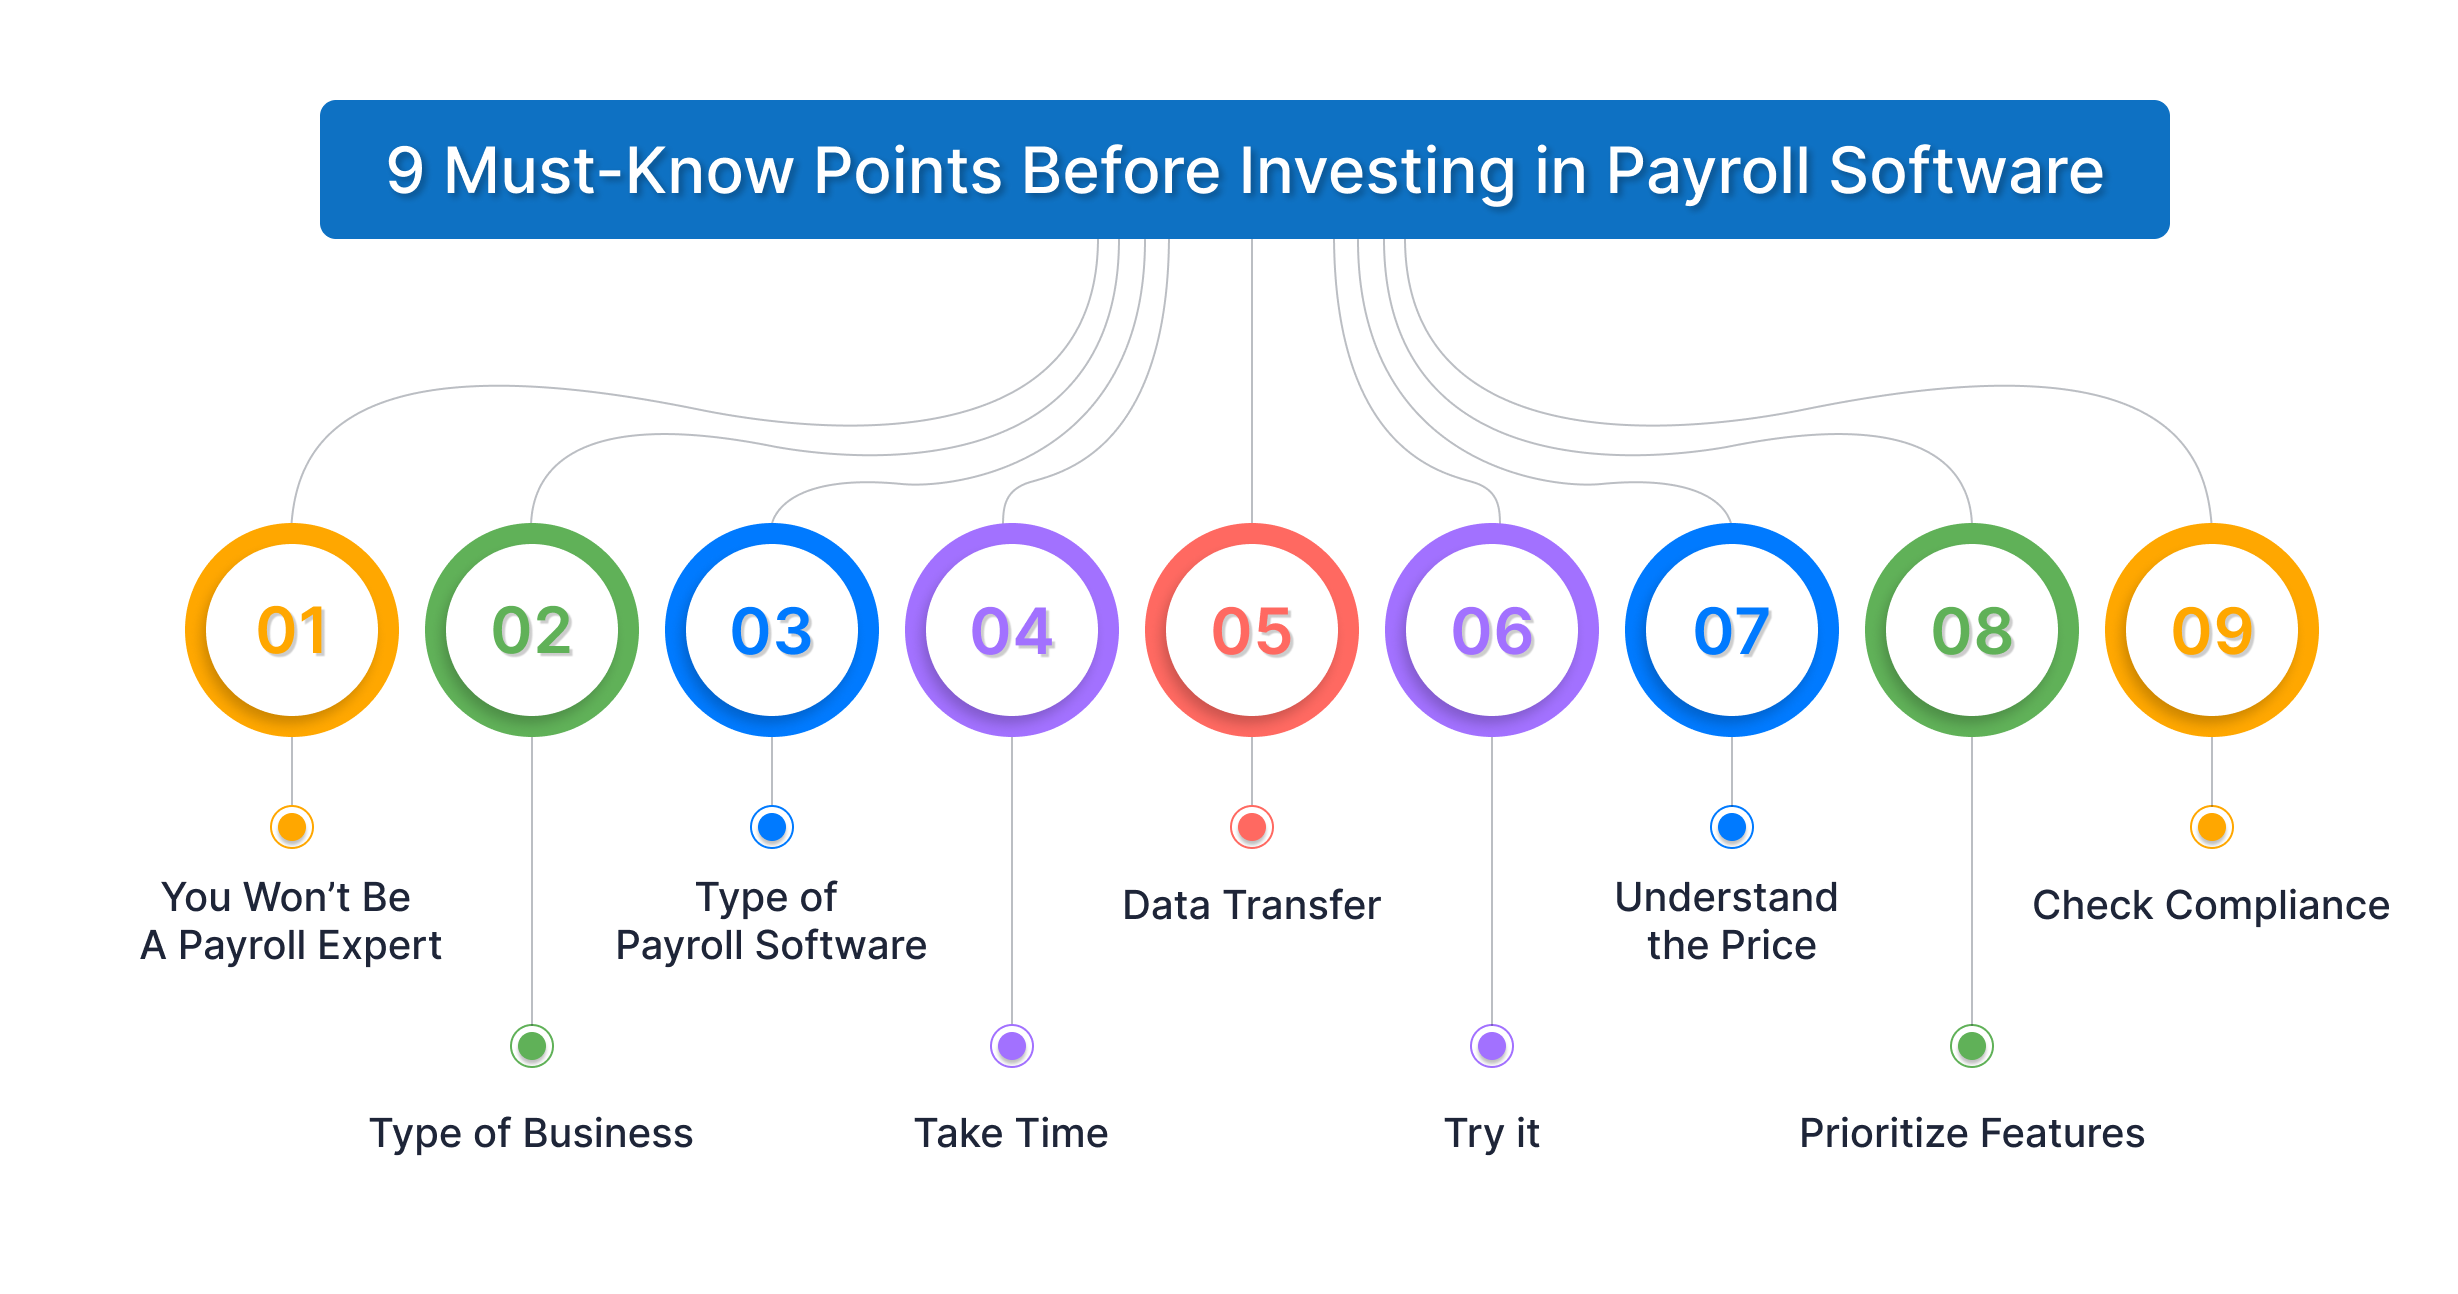 Investing in Payroll Software